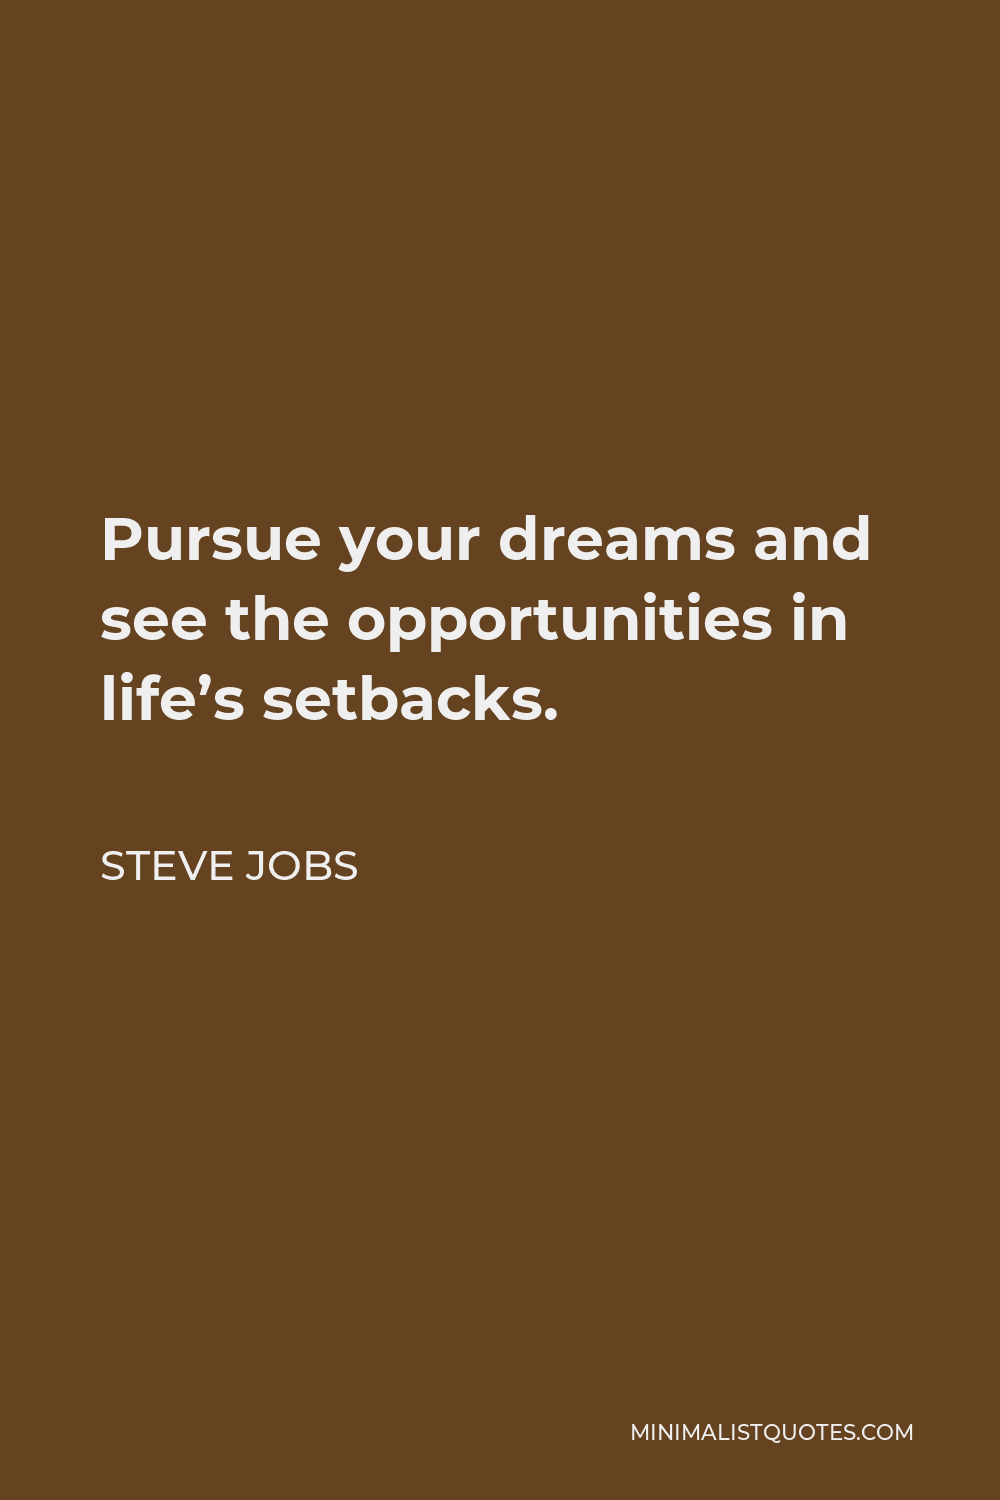 Steve Jobs Quote - Pursue your dreams and see the opportunities in life’s setbacks.